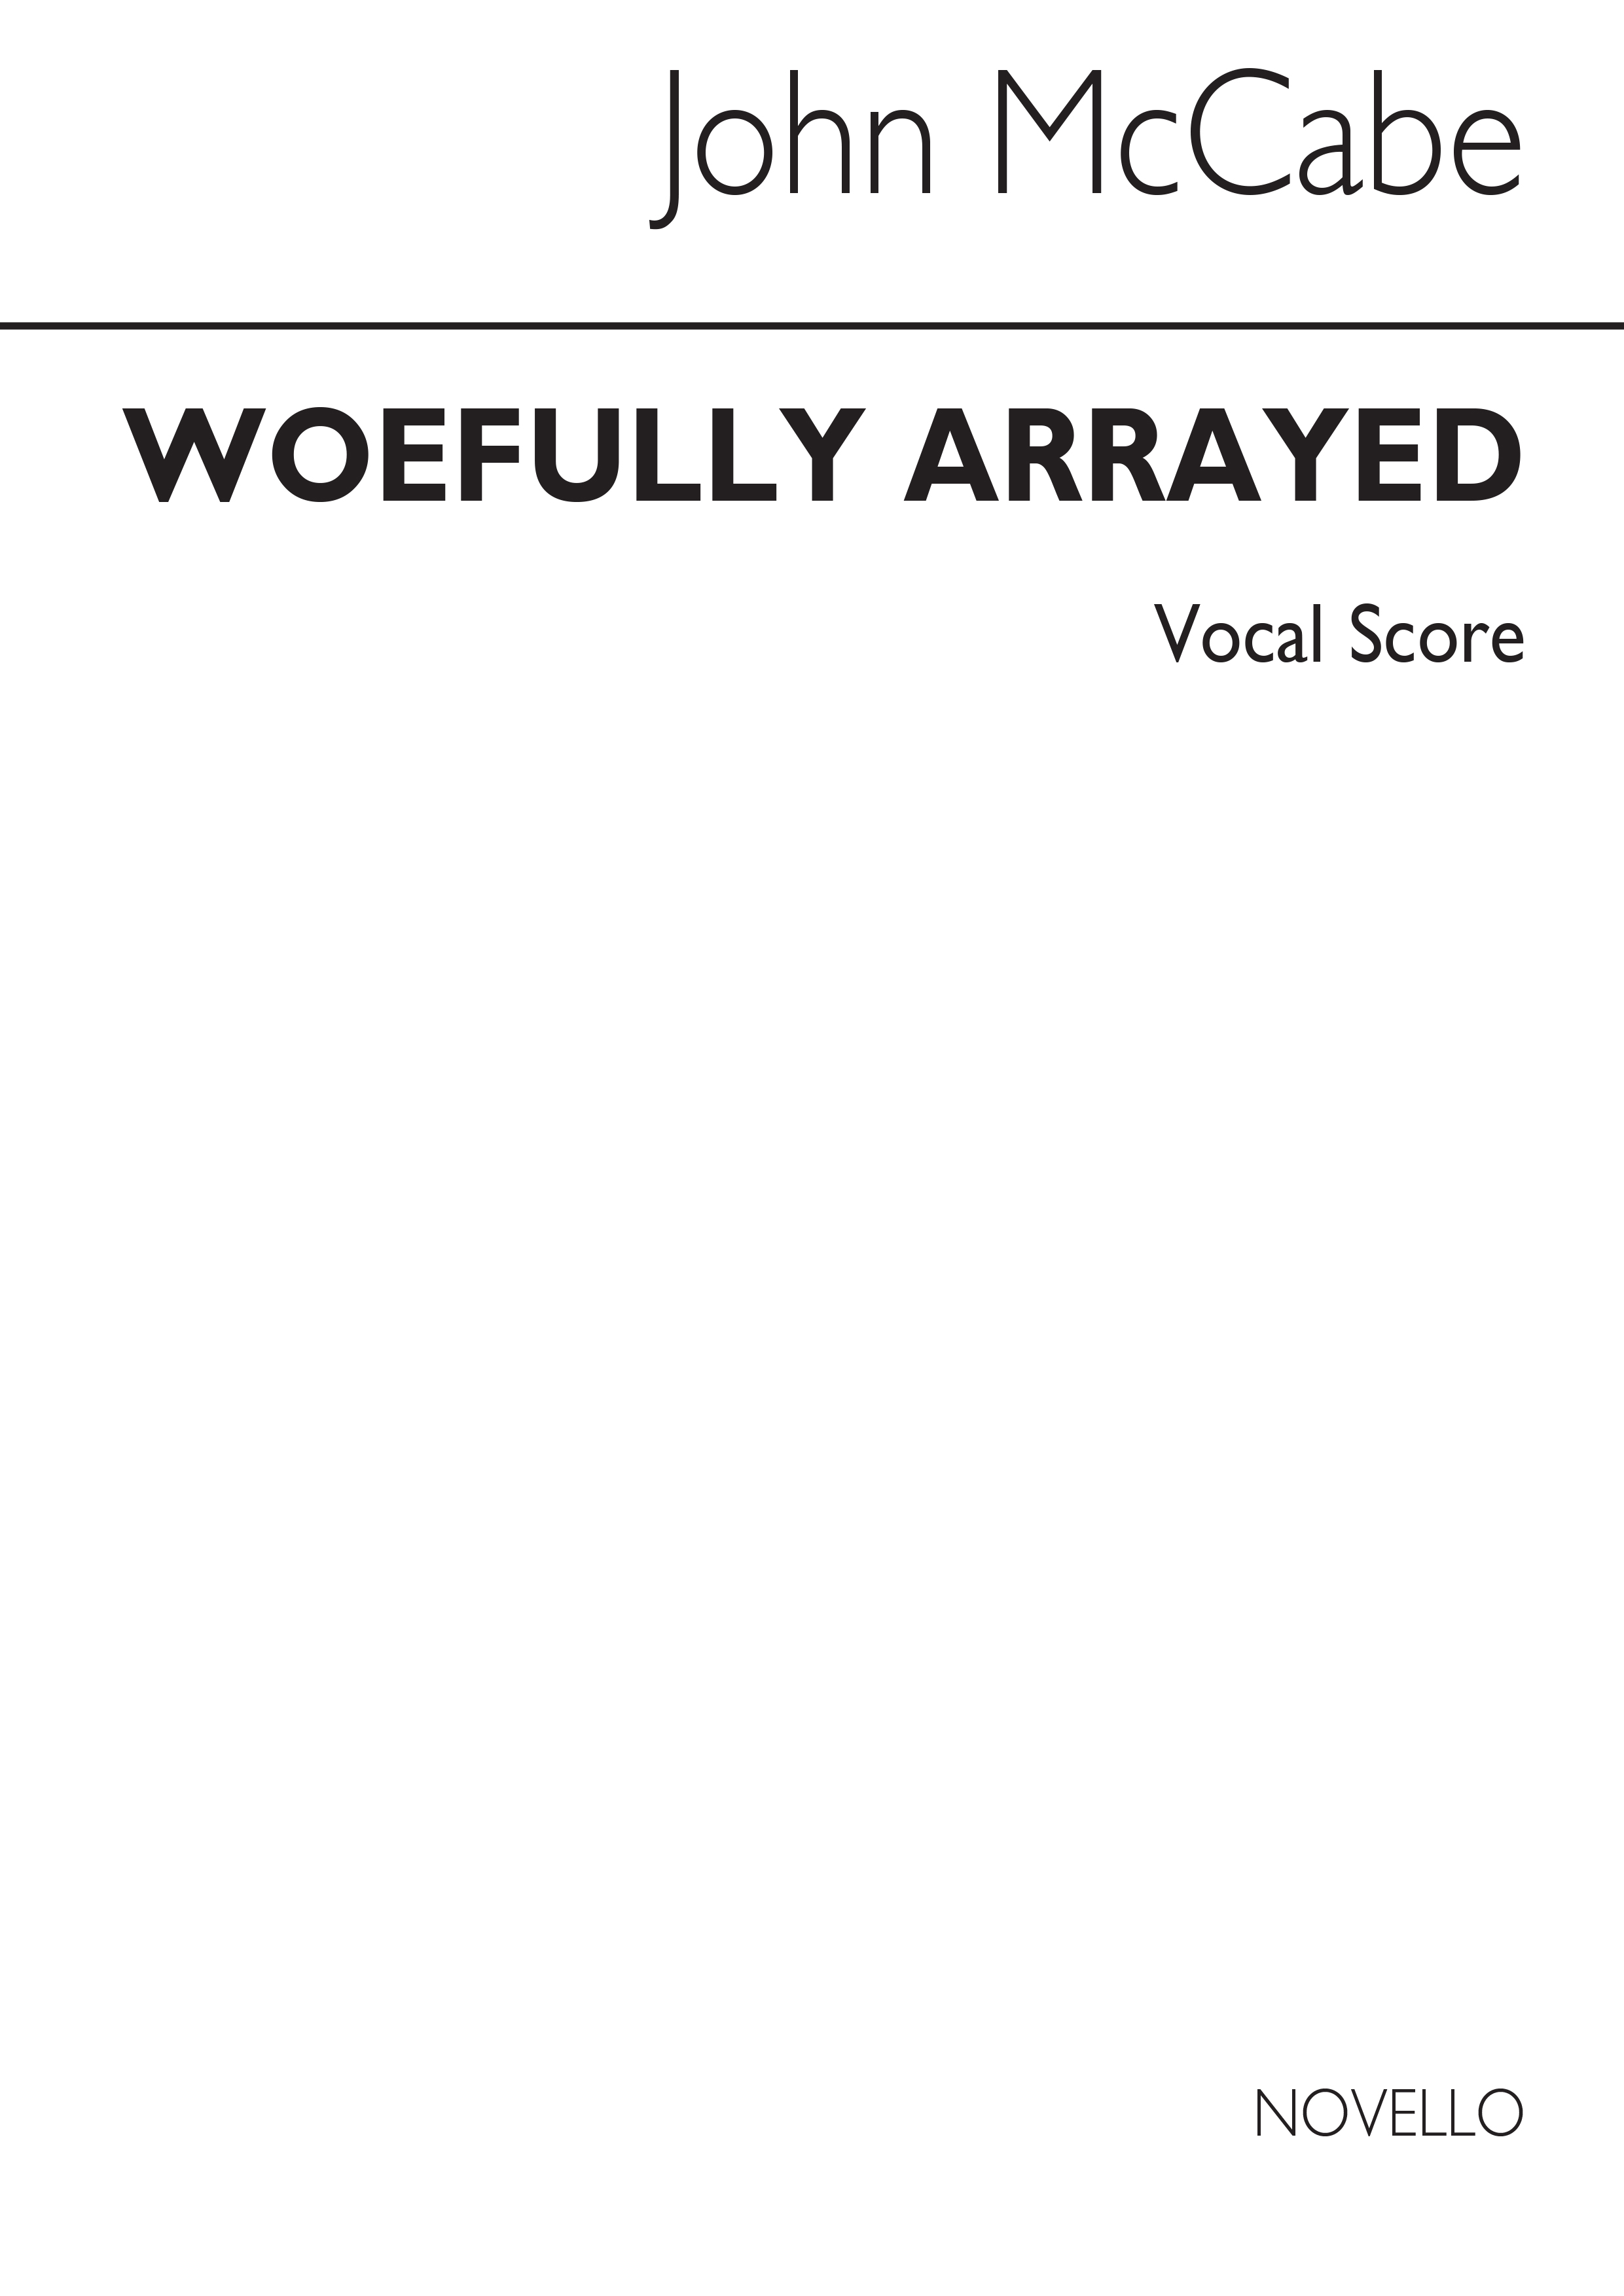 John McCabe: Woefully Arrayed for Twelve Voices: SATB: Vocal Score